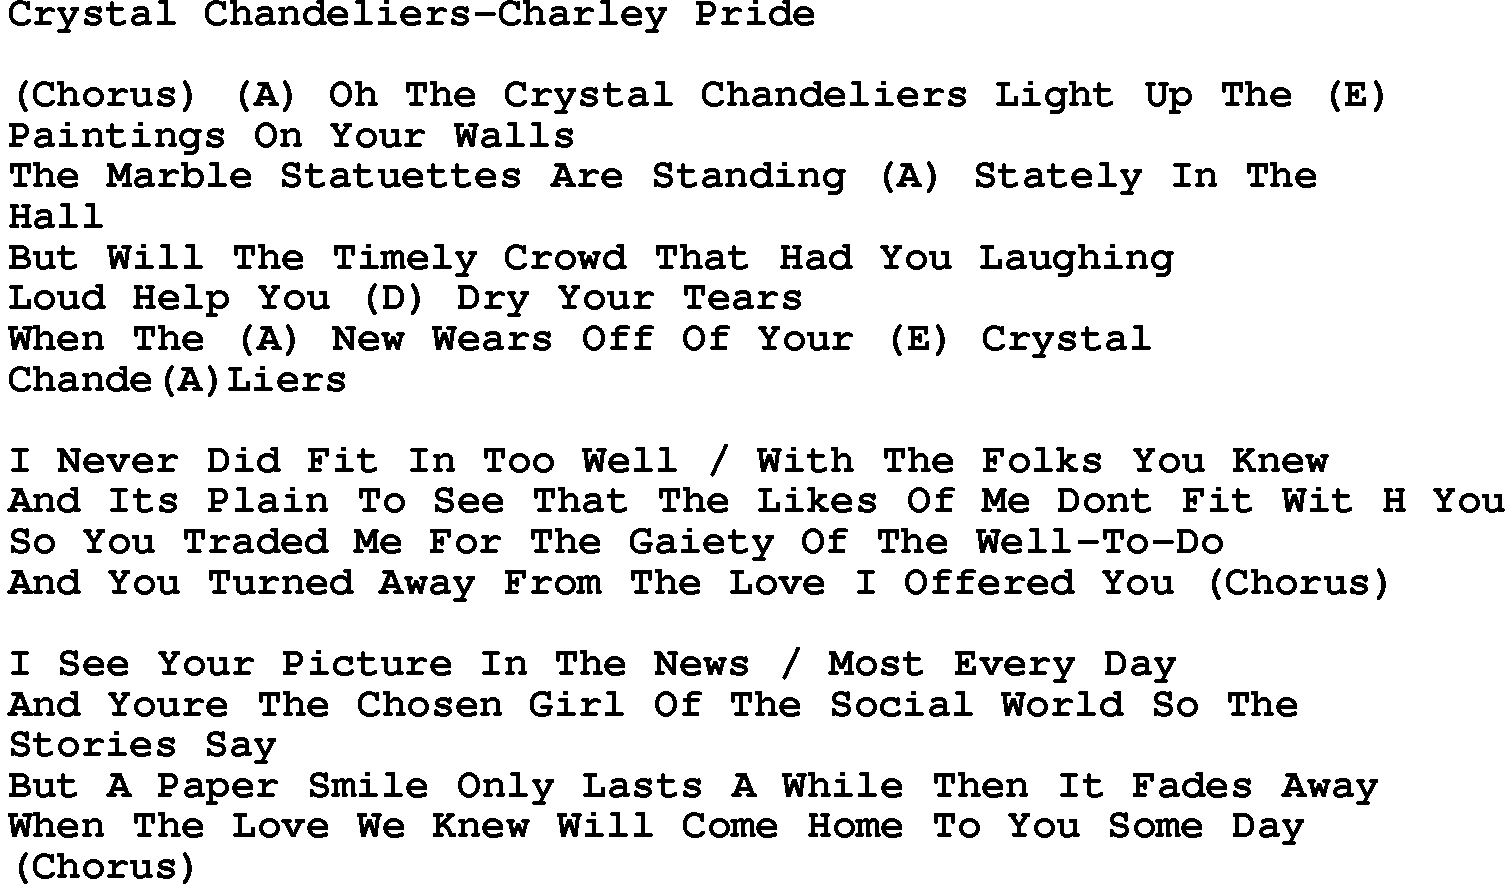 Country music song: Crystal Chandeliers-Charley Pride lyrics and chords